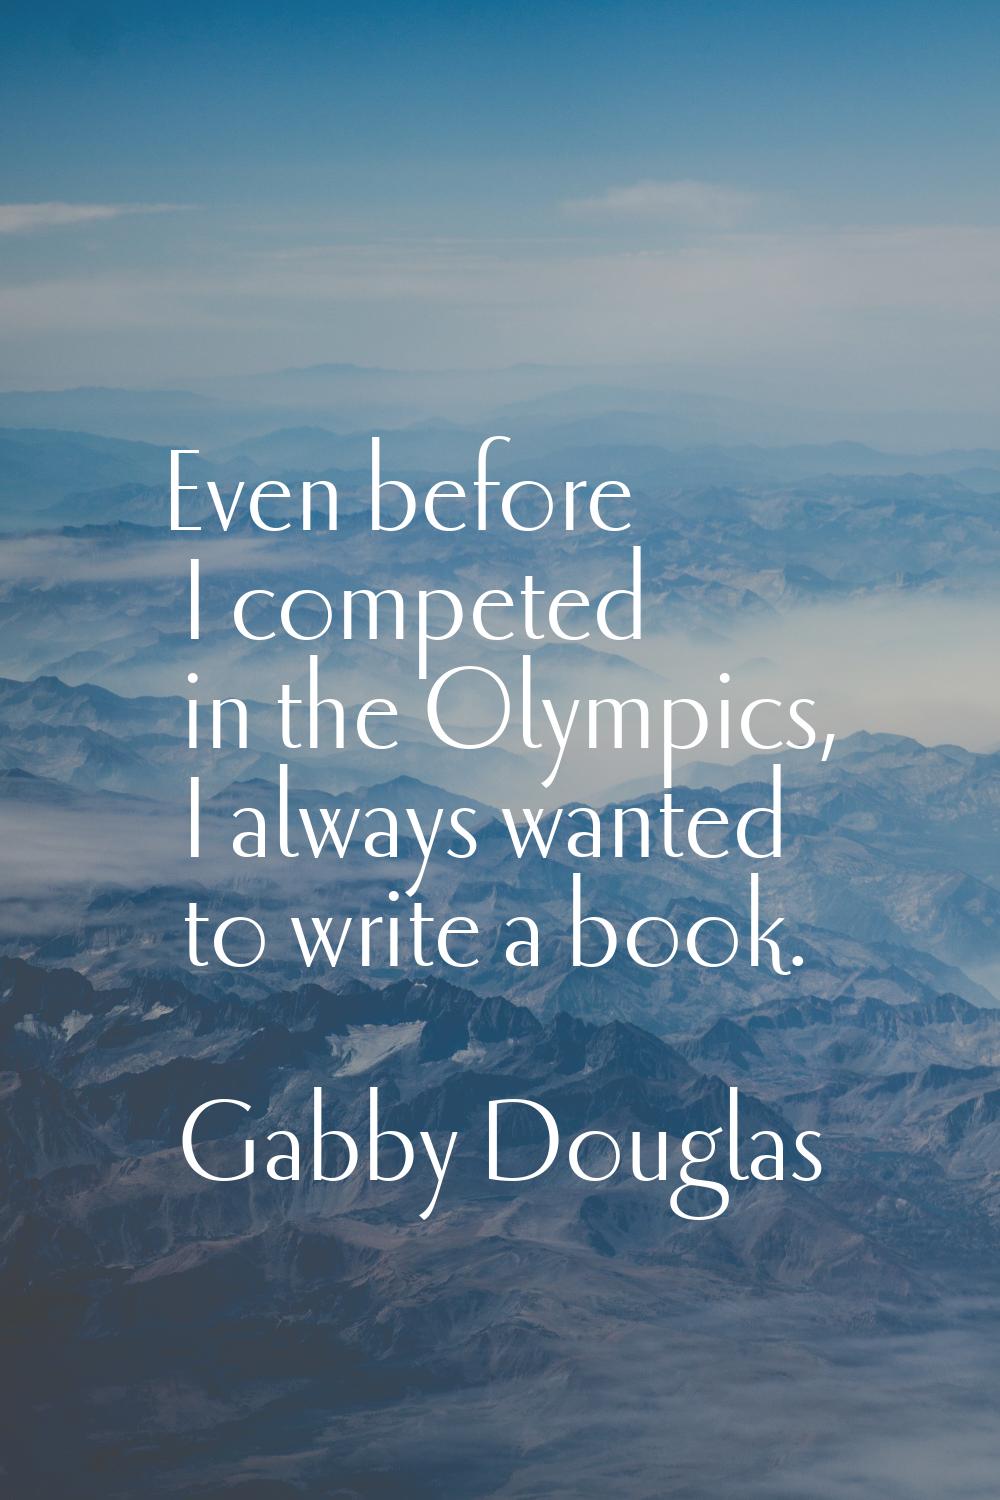 Even before I competed in the Olympics, I always wanted to write a book.